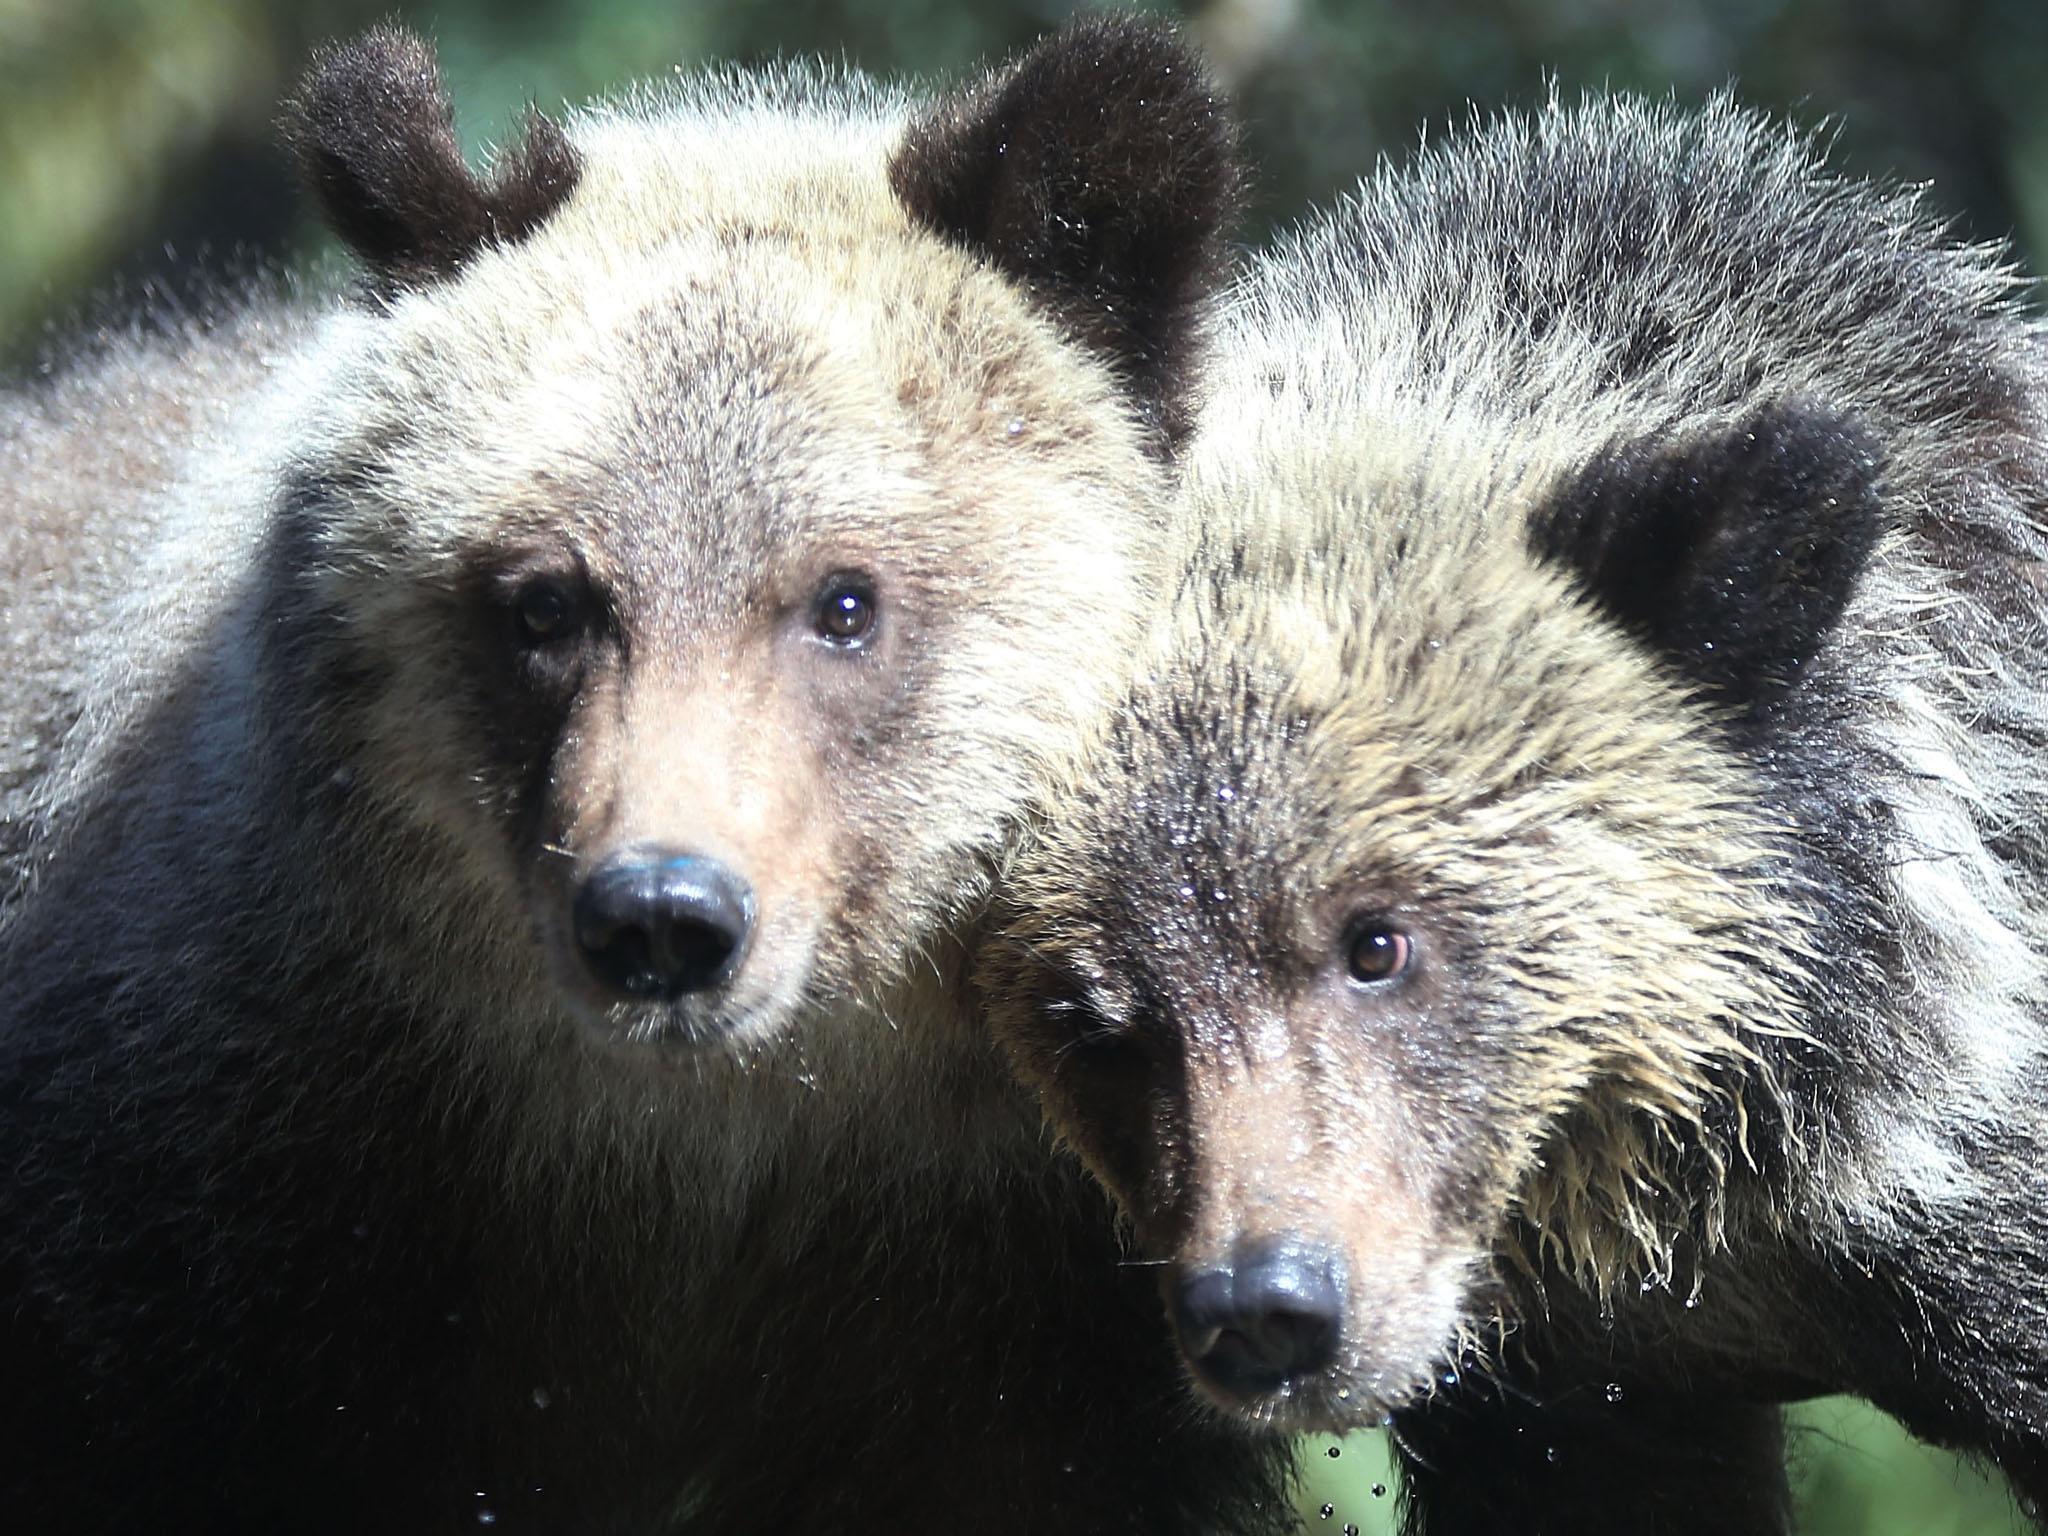 Over 15,000 grizzly bears currently live in British Columbia